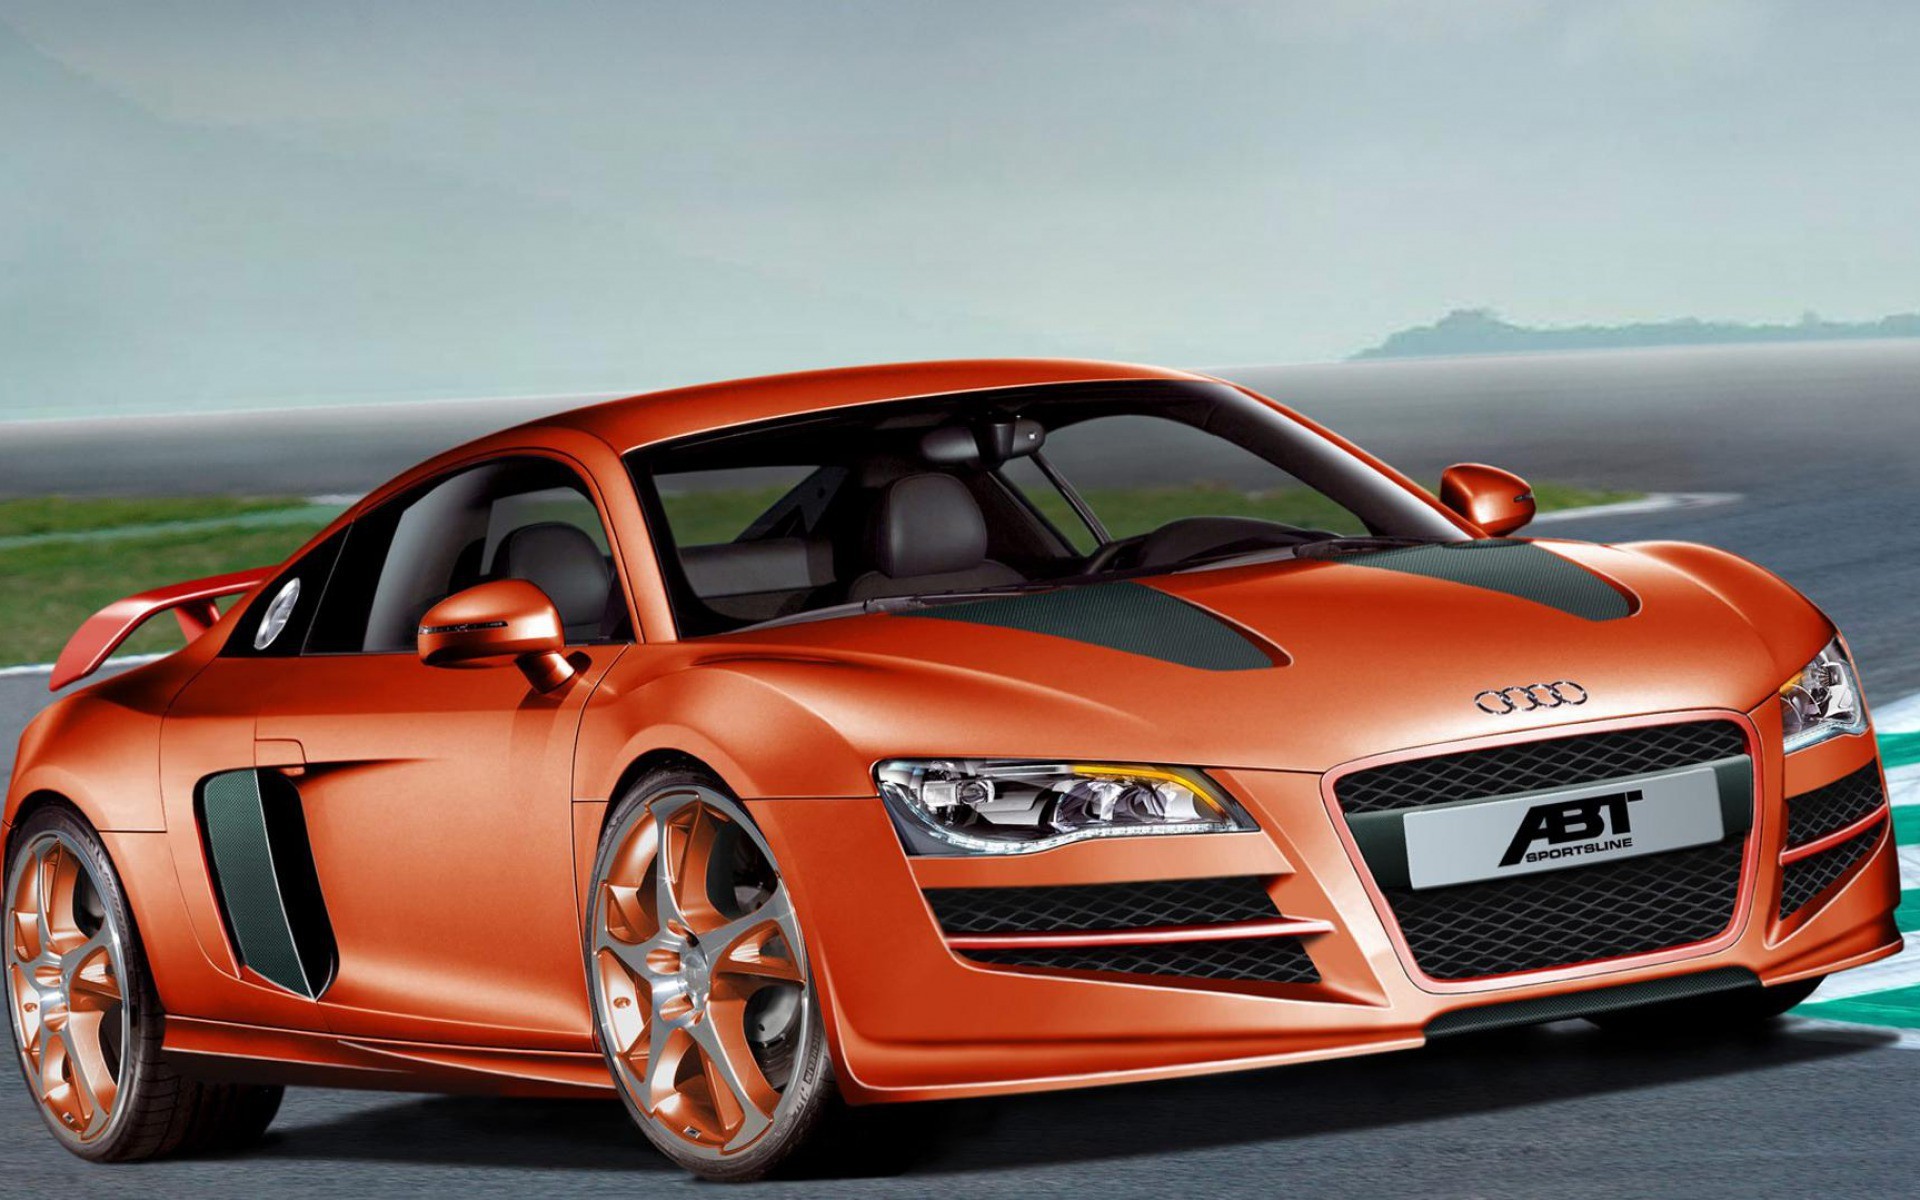 Orange sport Audi R10 wallpapers and images - wallpapers ...
